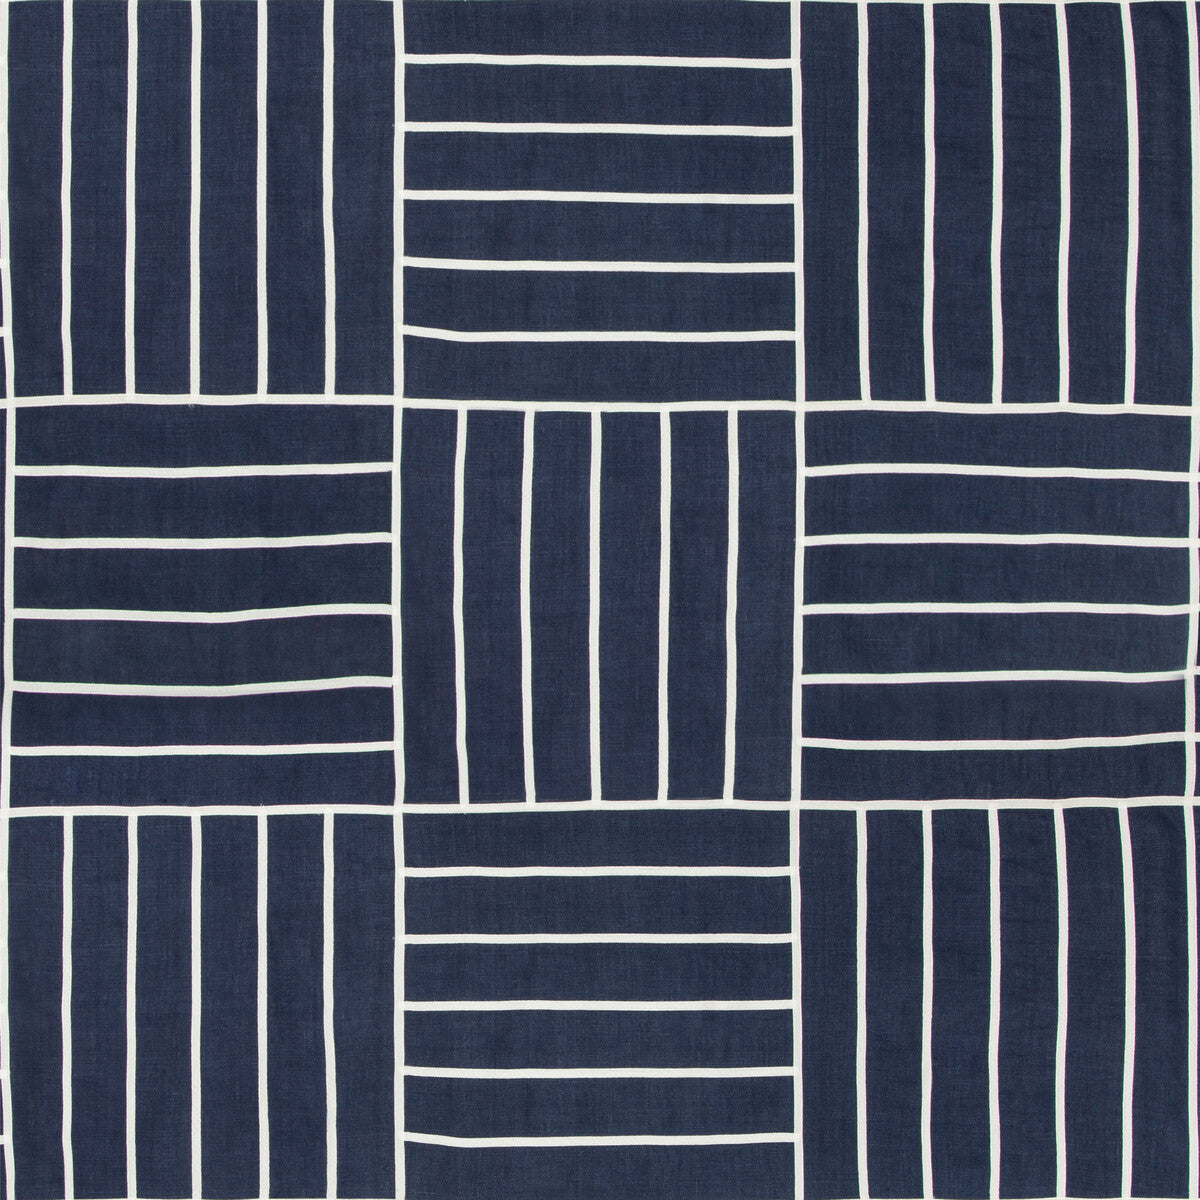 Local Grid fabric in indigo color - pattern 35510.51.0 - by Kravet Design in the Barclay Butera Sagamore collection